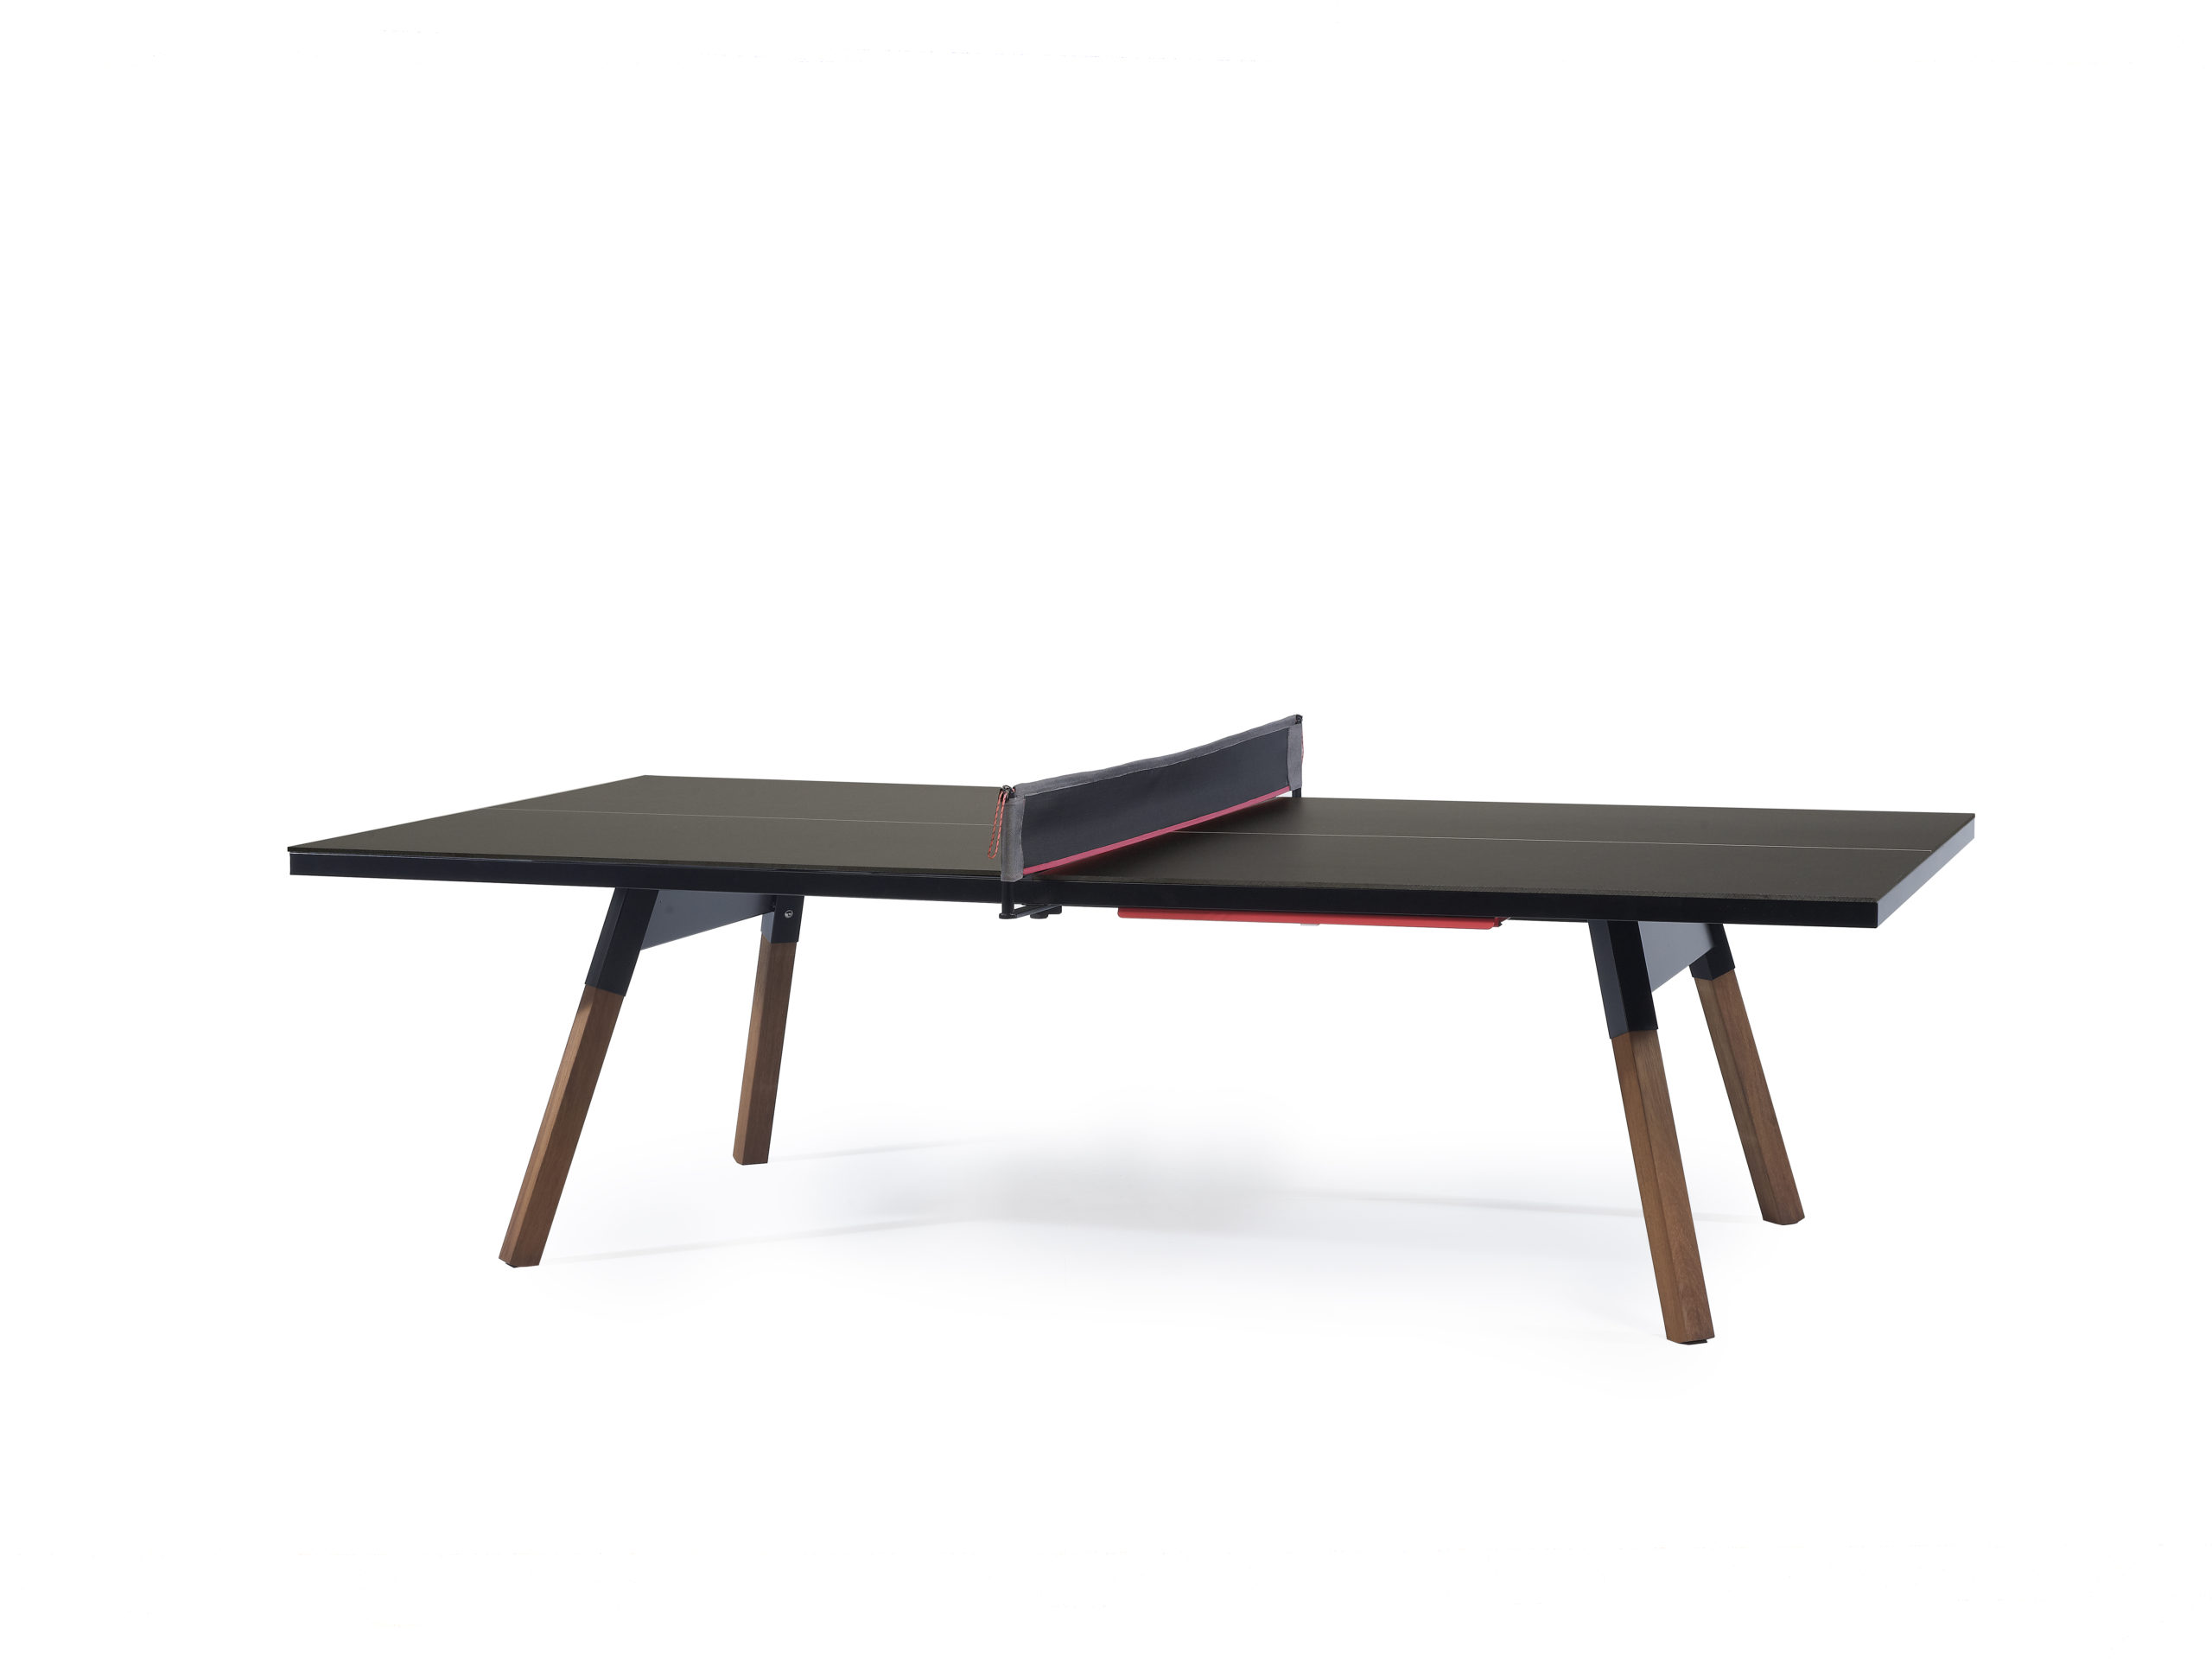 You and Me ping pong table - Standard size - AJAR